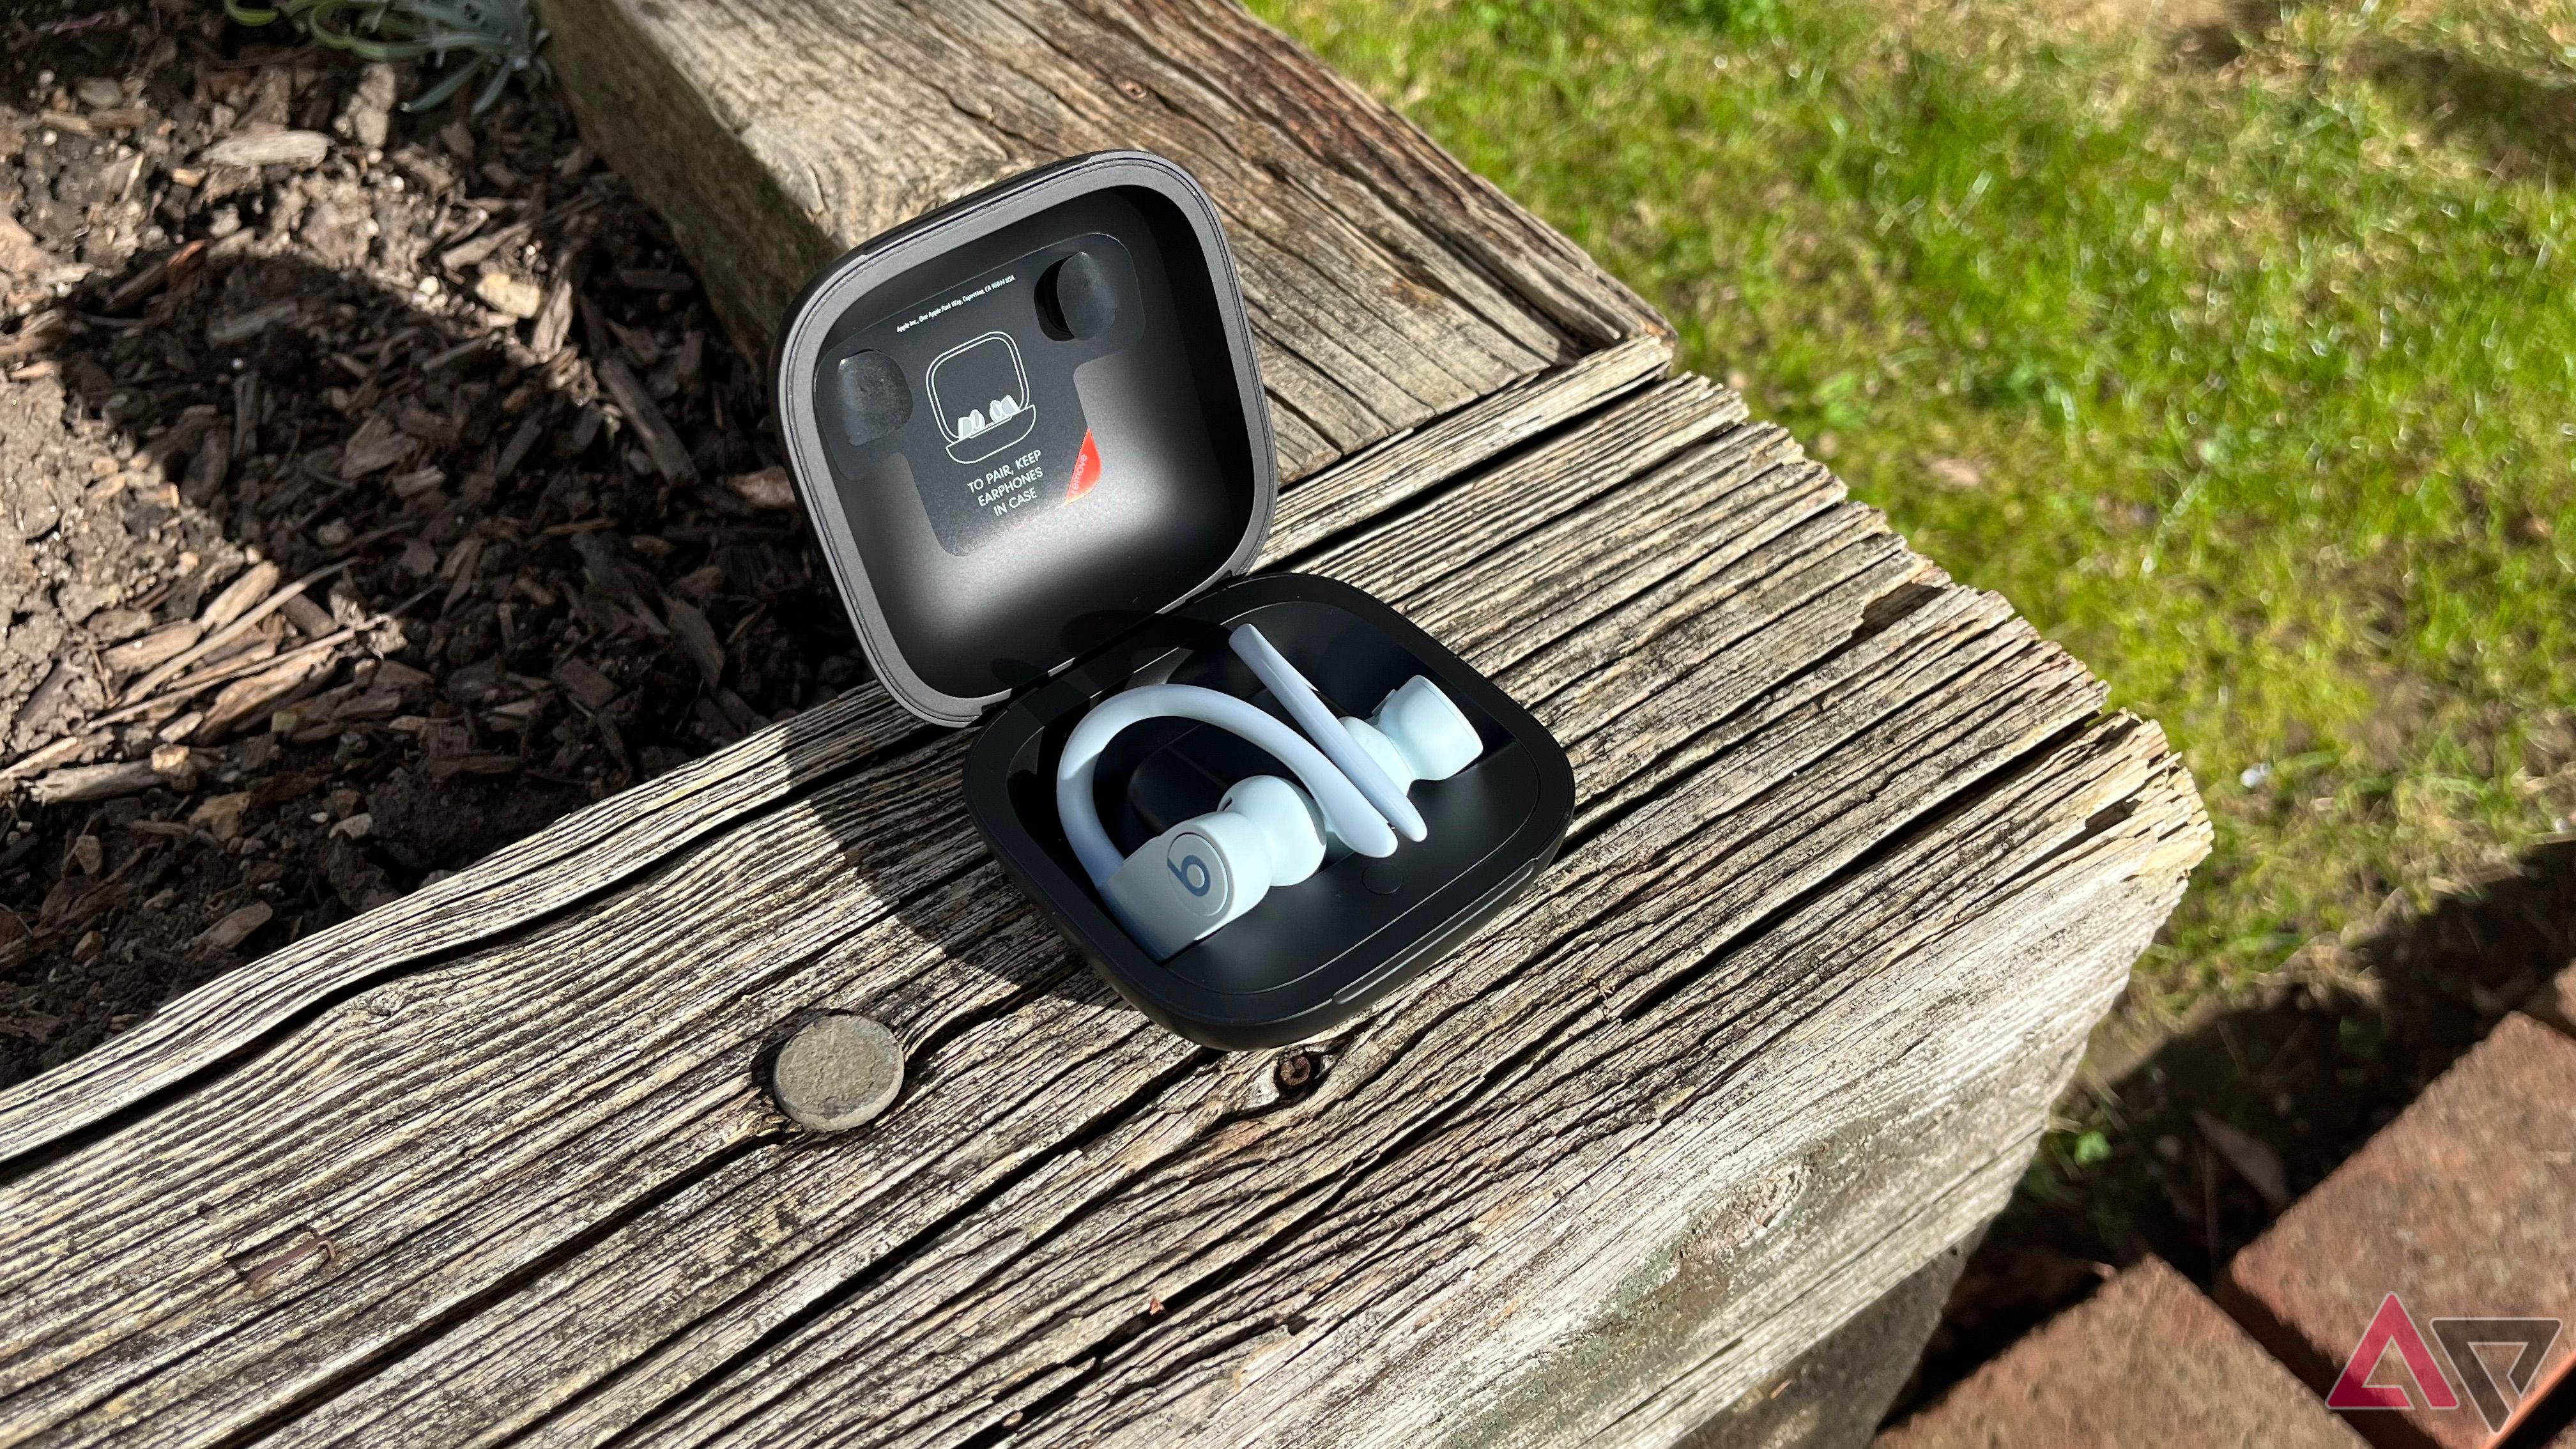 The Powerbeats Pro 'totally wireless' earphones are the most Apple product  Beats has ever made